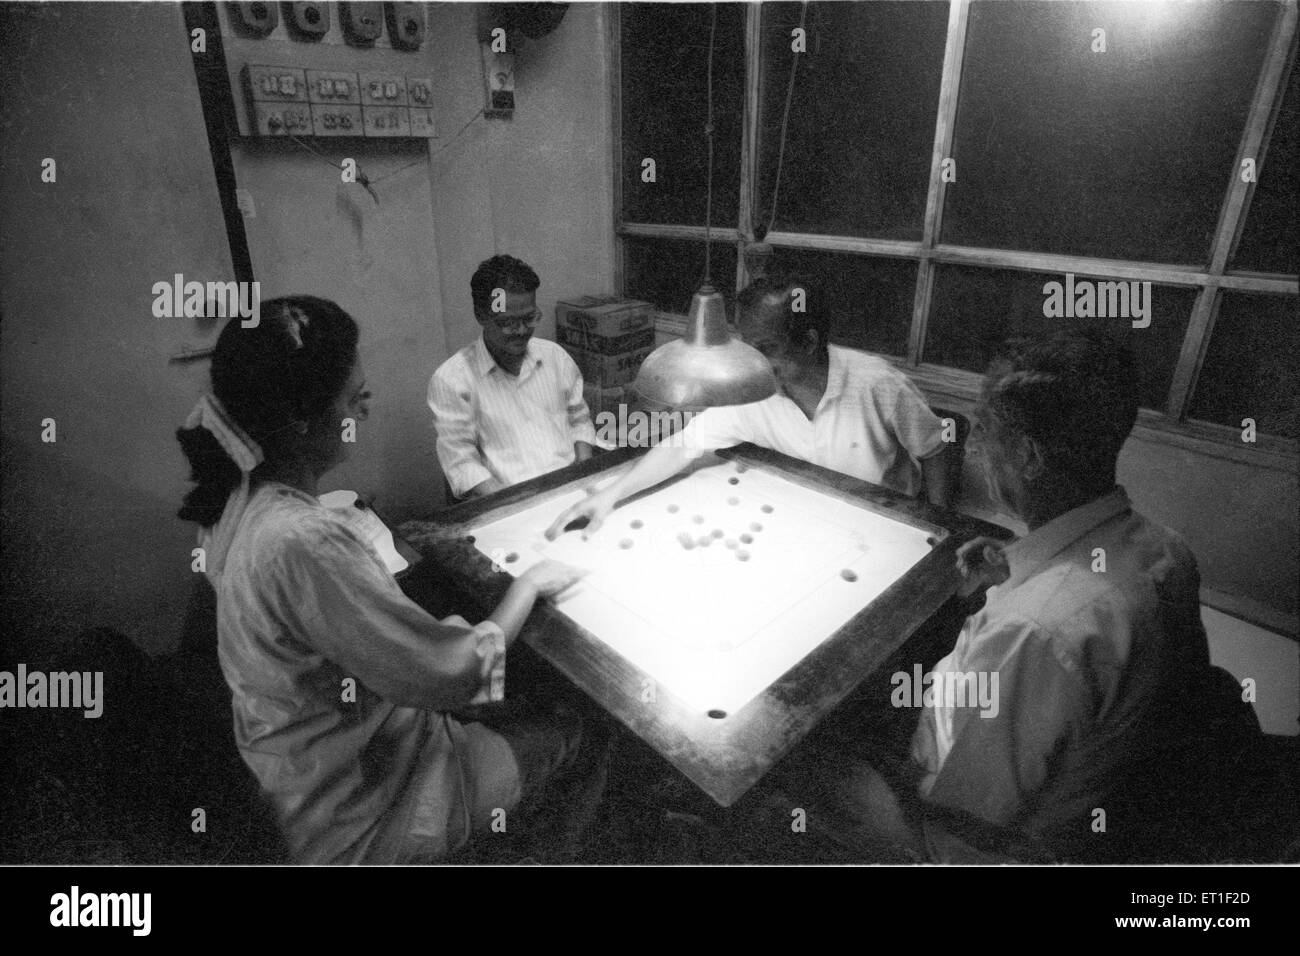 People playing carom ; India NO MR Stock Photo